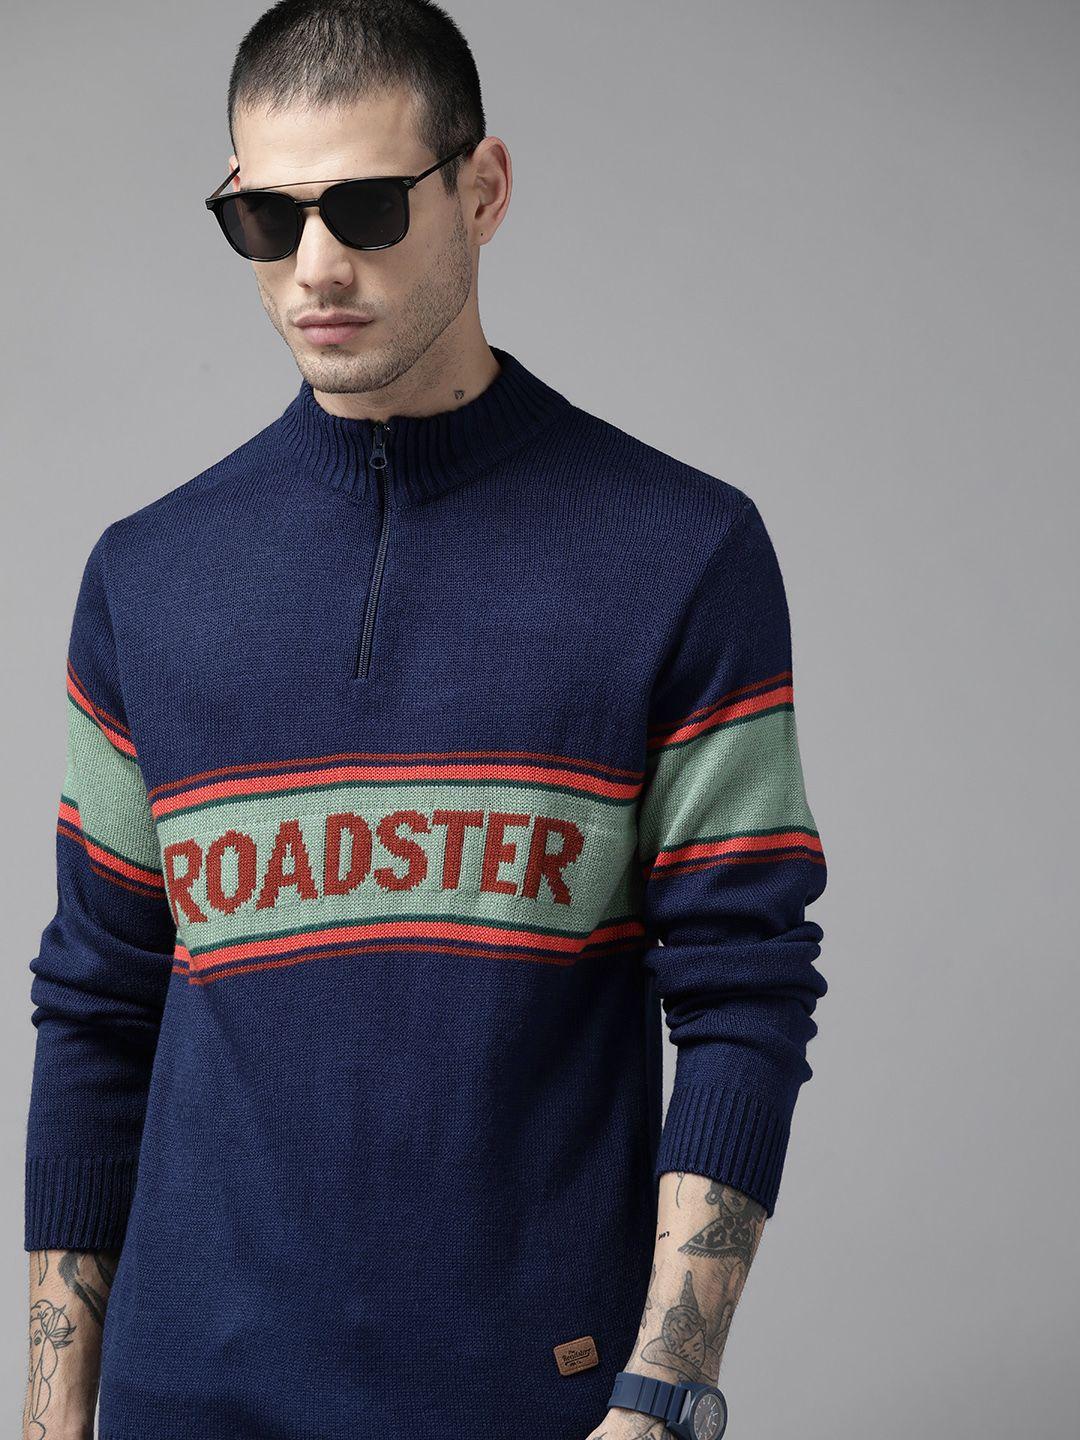 the roadster lifestyle co. men blue & green printed pullover